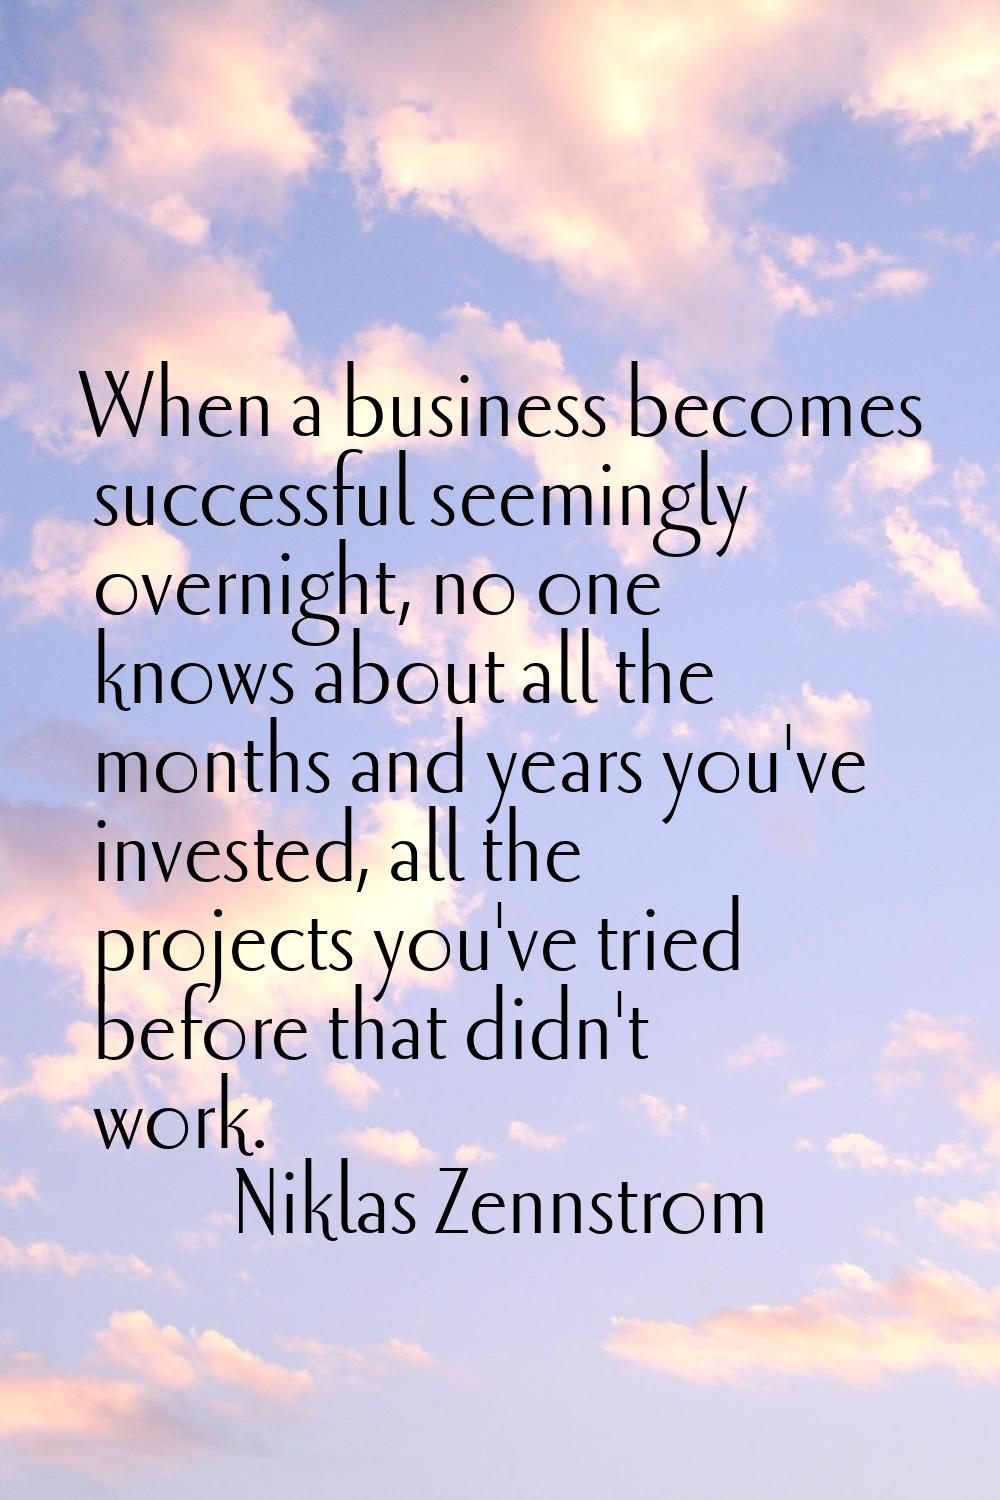 When a business becomes successful seemingly overnight, no one knows about all the months and years